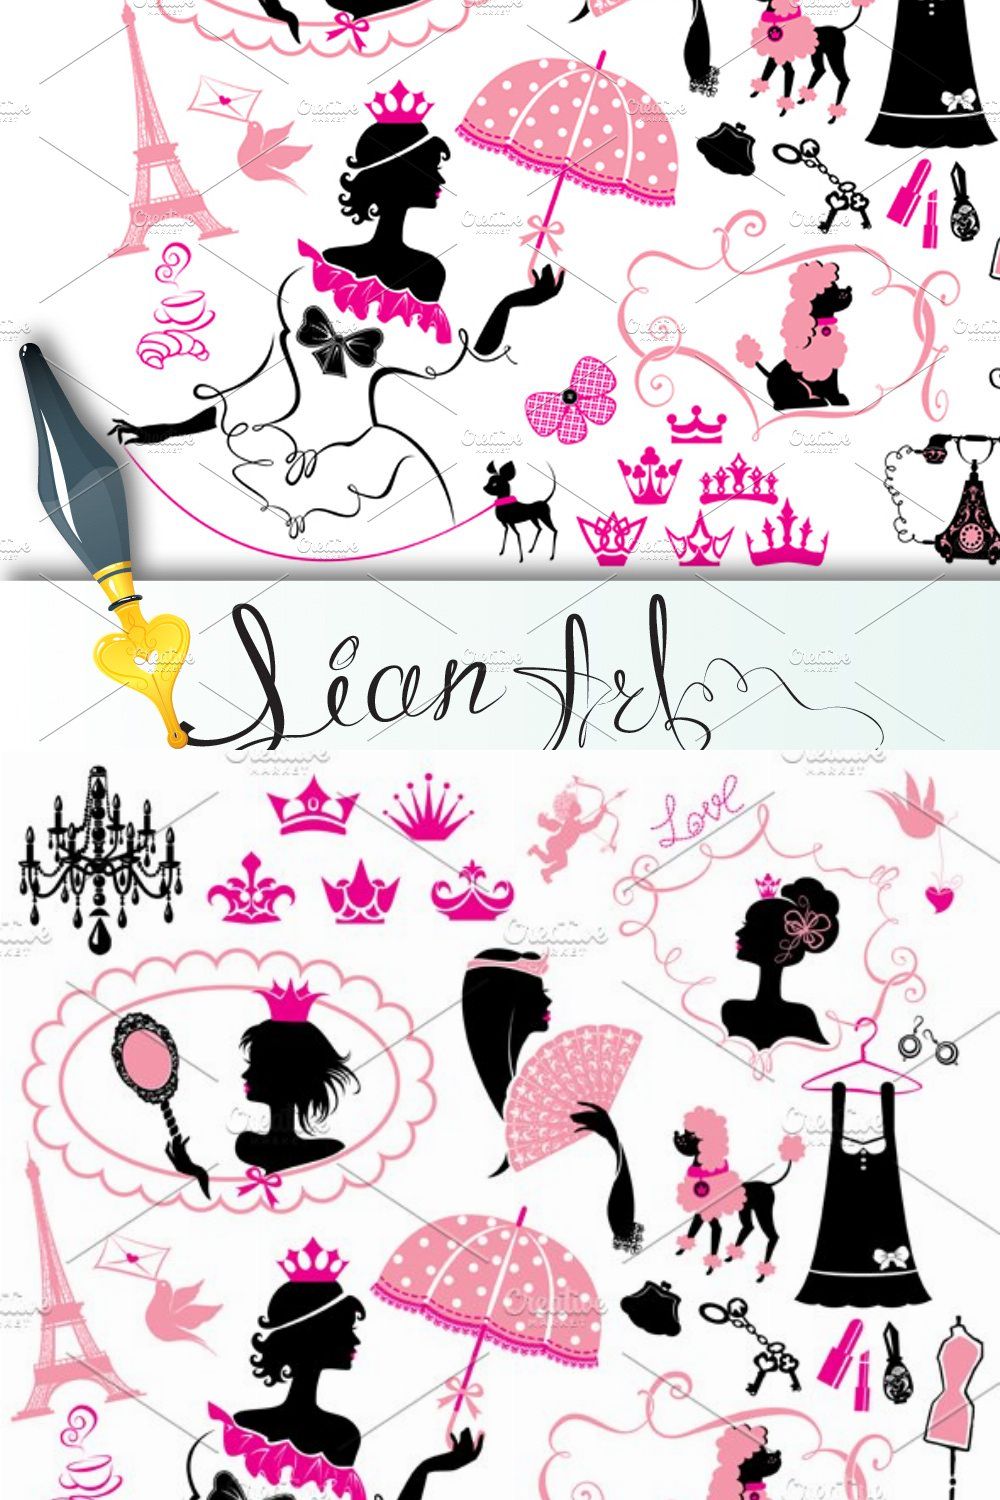 Set of princess girls silhouettes pinterest preview image.